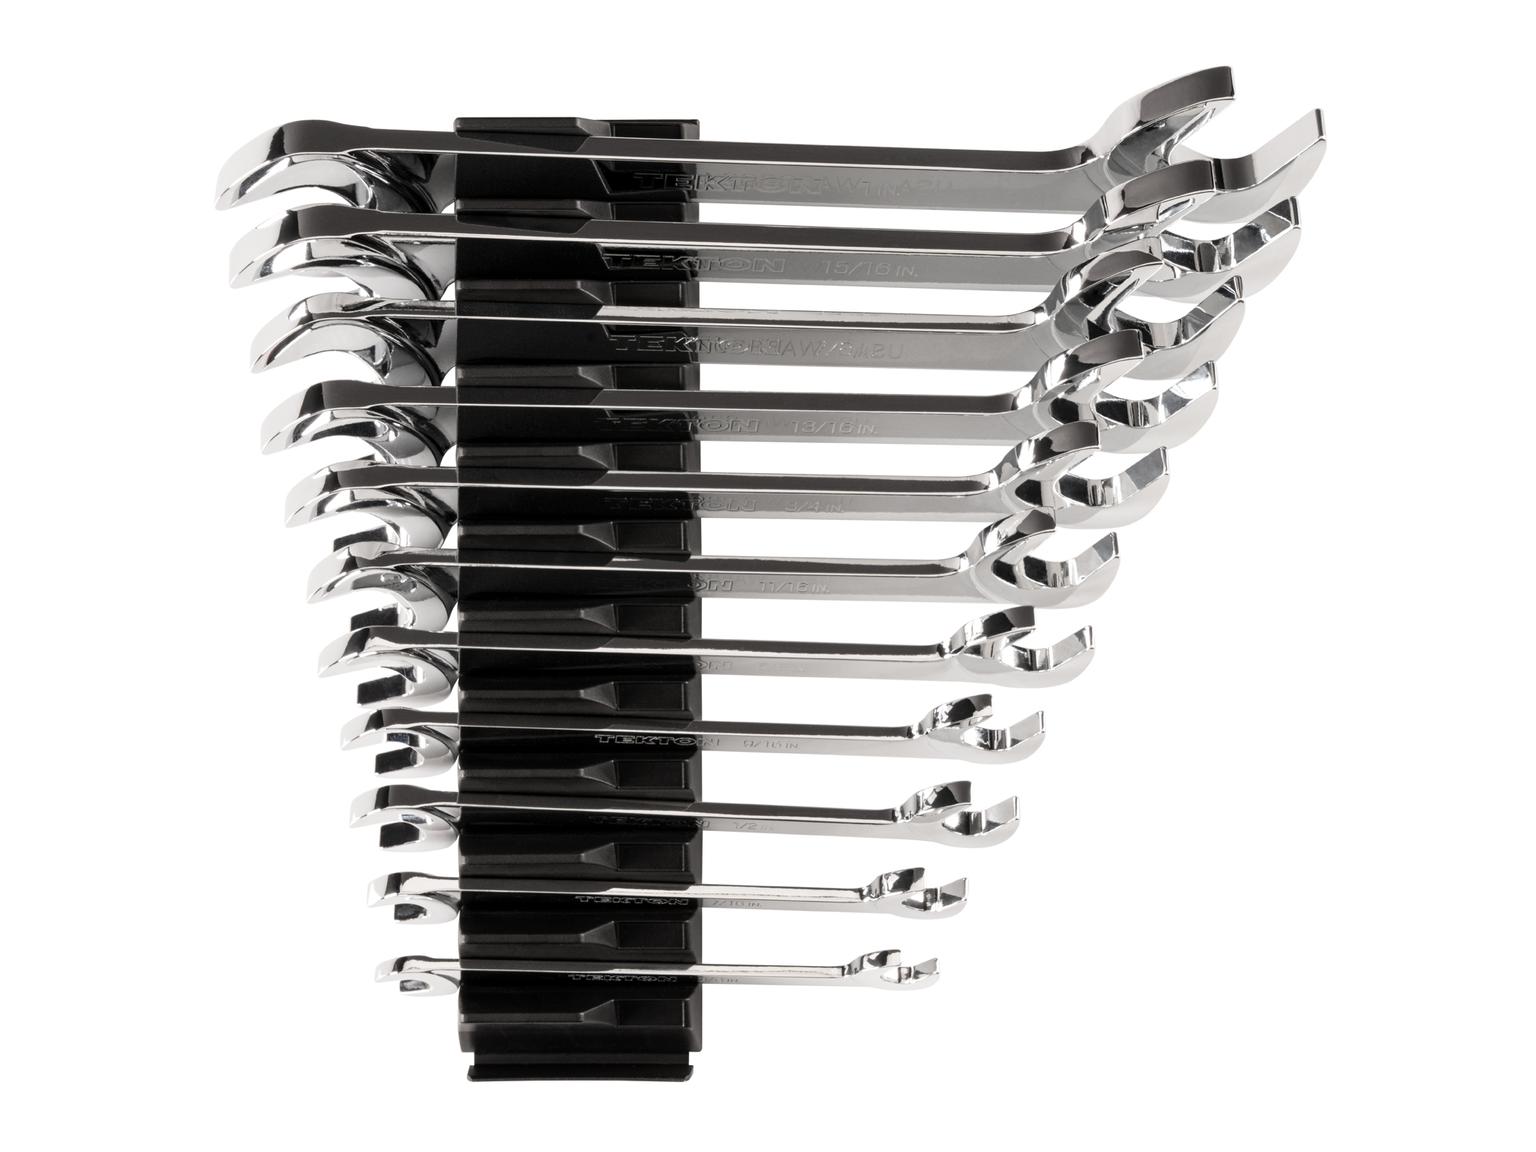 TEKTON WAE95102-T Angle Head Open End Wrench Set with Modular Slotted Organizer, 11-Piece (3/8 - 1 in.)